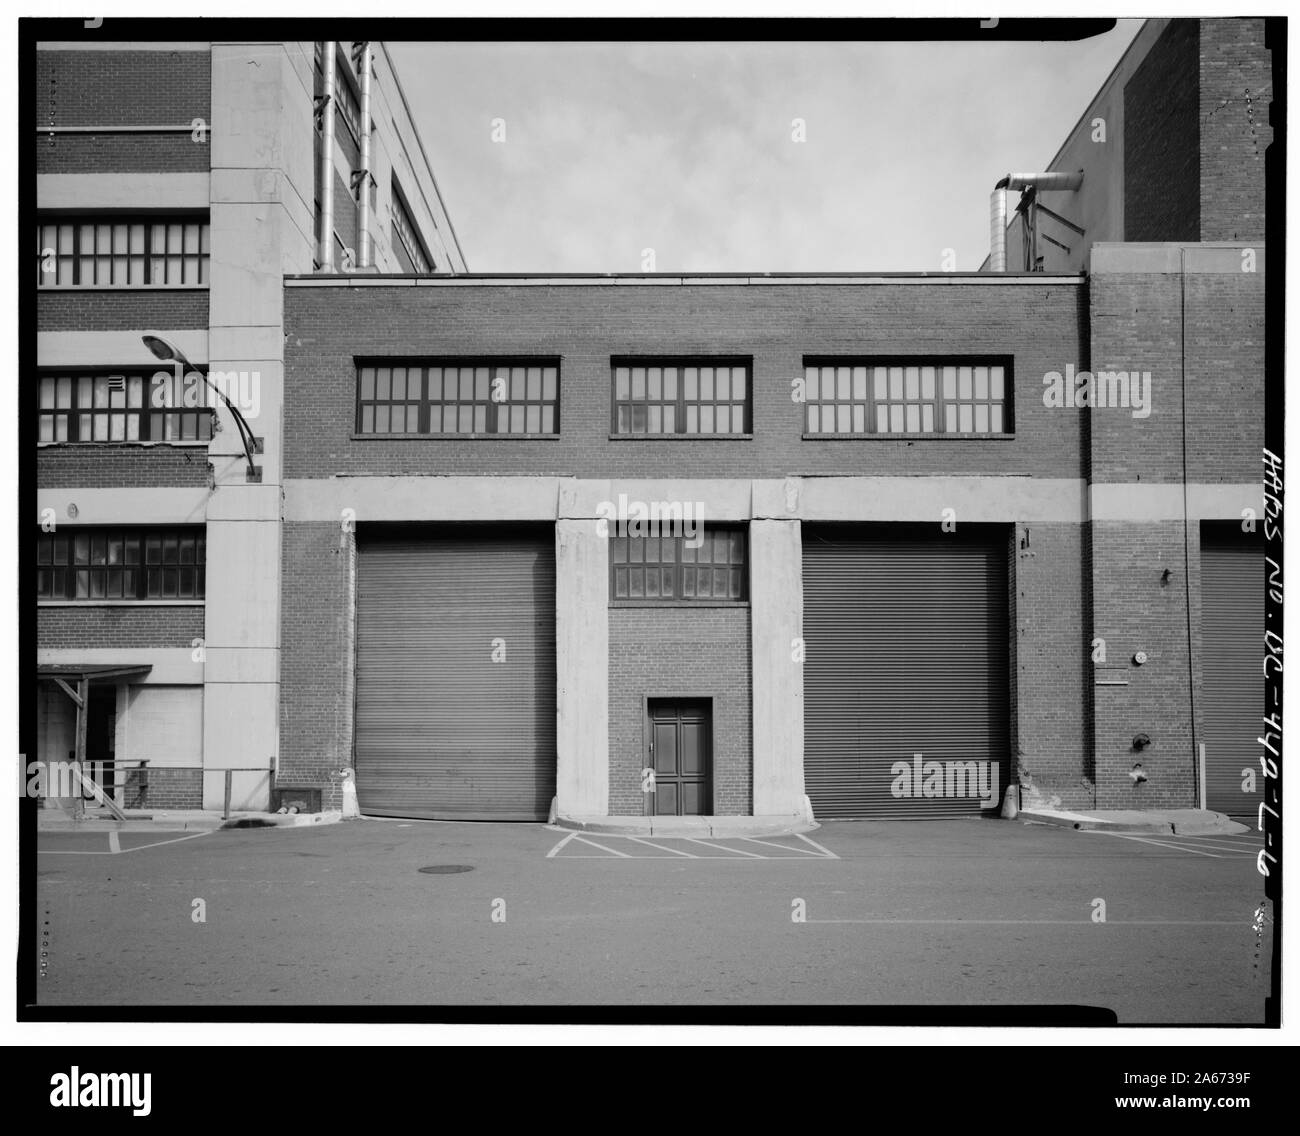 West elevation of crane runway attached to Building No. 143, looking east; West elevation of crane runway attached to Building No. 143, looking east - Navy Yard, Building No. 143, Between Isaac Hull & Patterson Avenues, Washington, District of Columbia, DC; Stock Photo